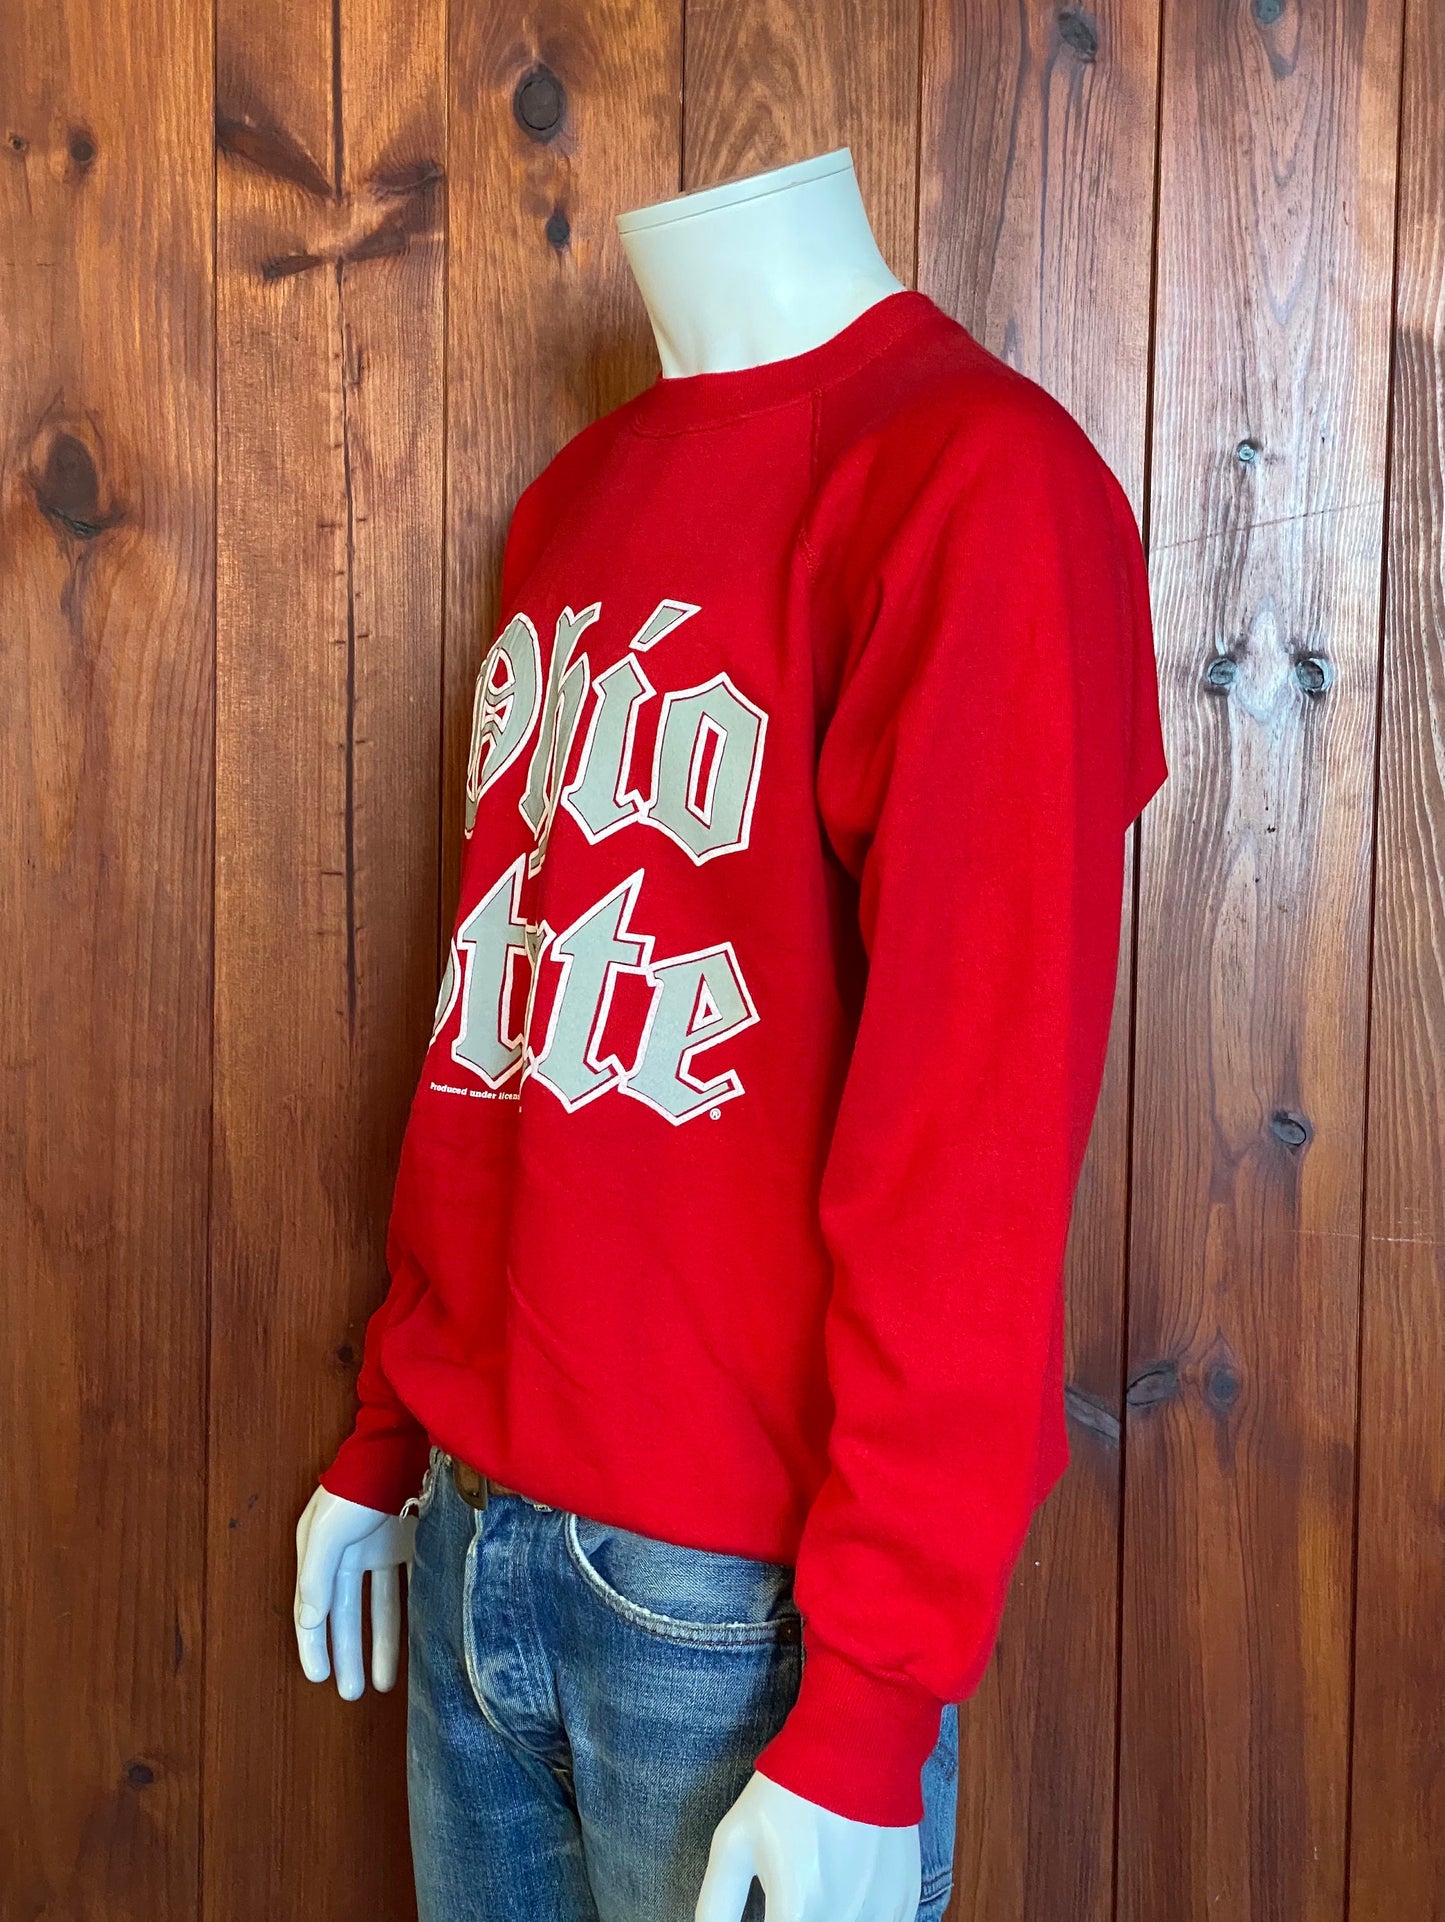 Size XL. Ohio State 80s vintage sweatshirt made in USA